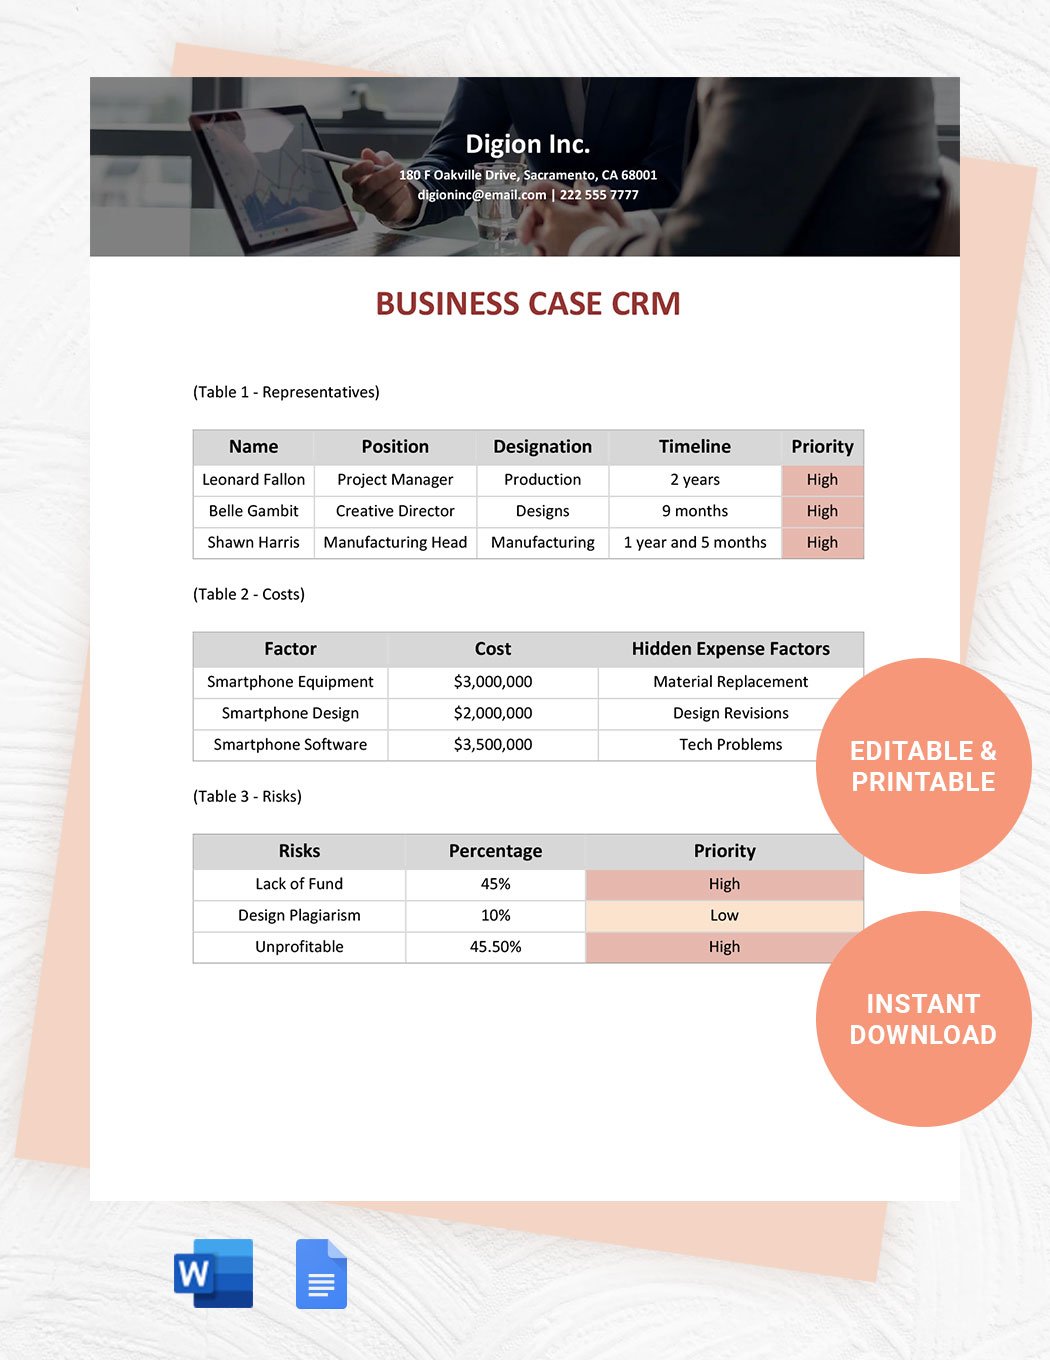 Business Case CRM Template in Word, Google Docs